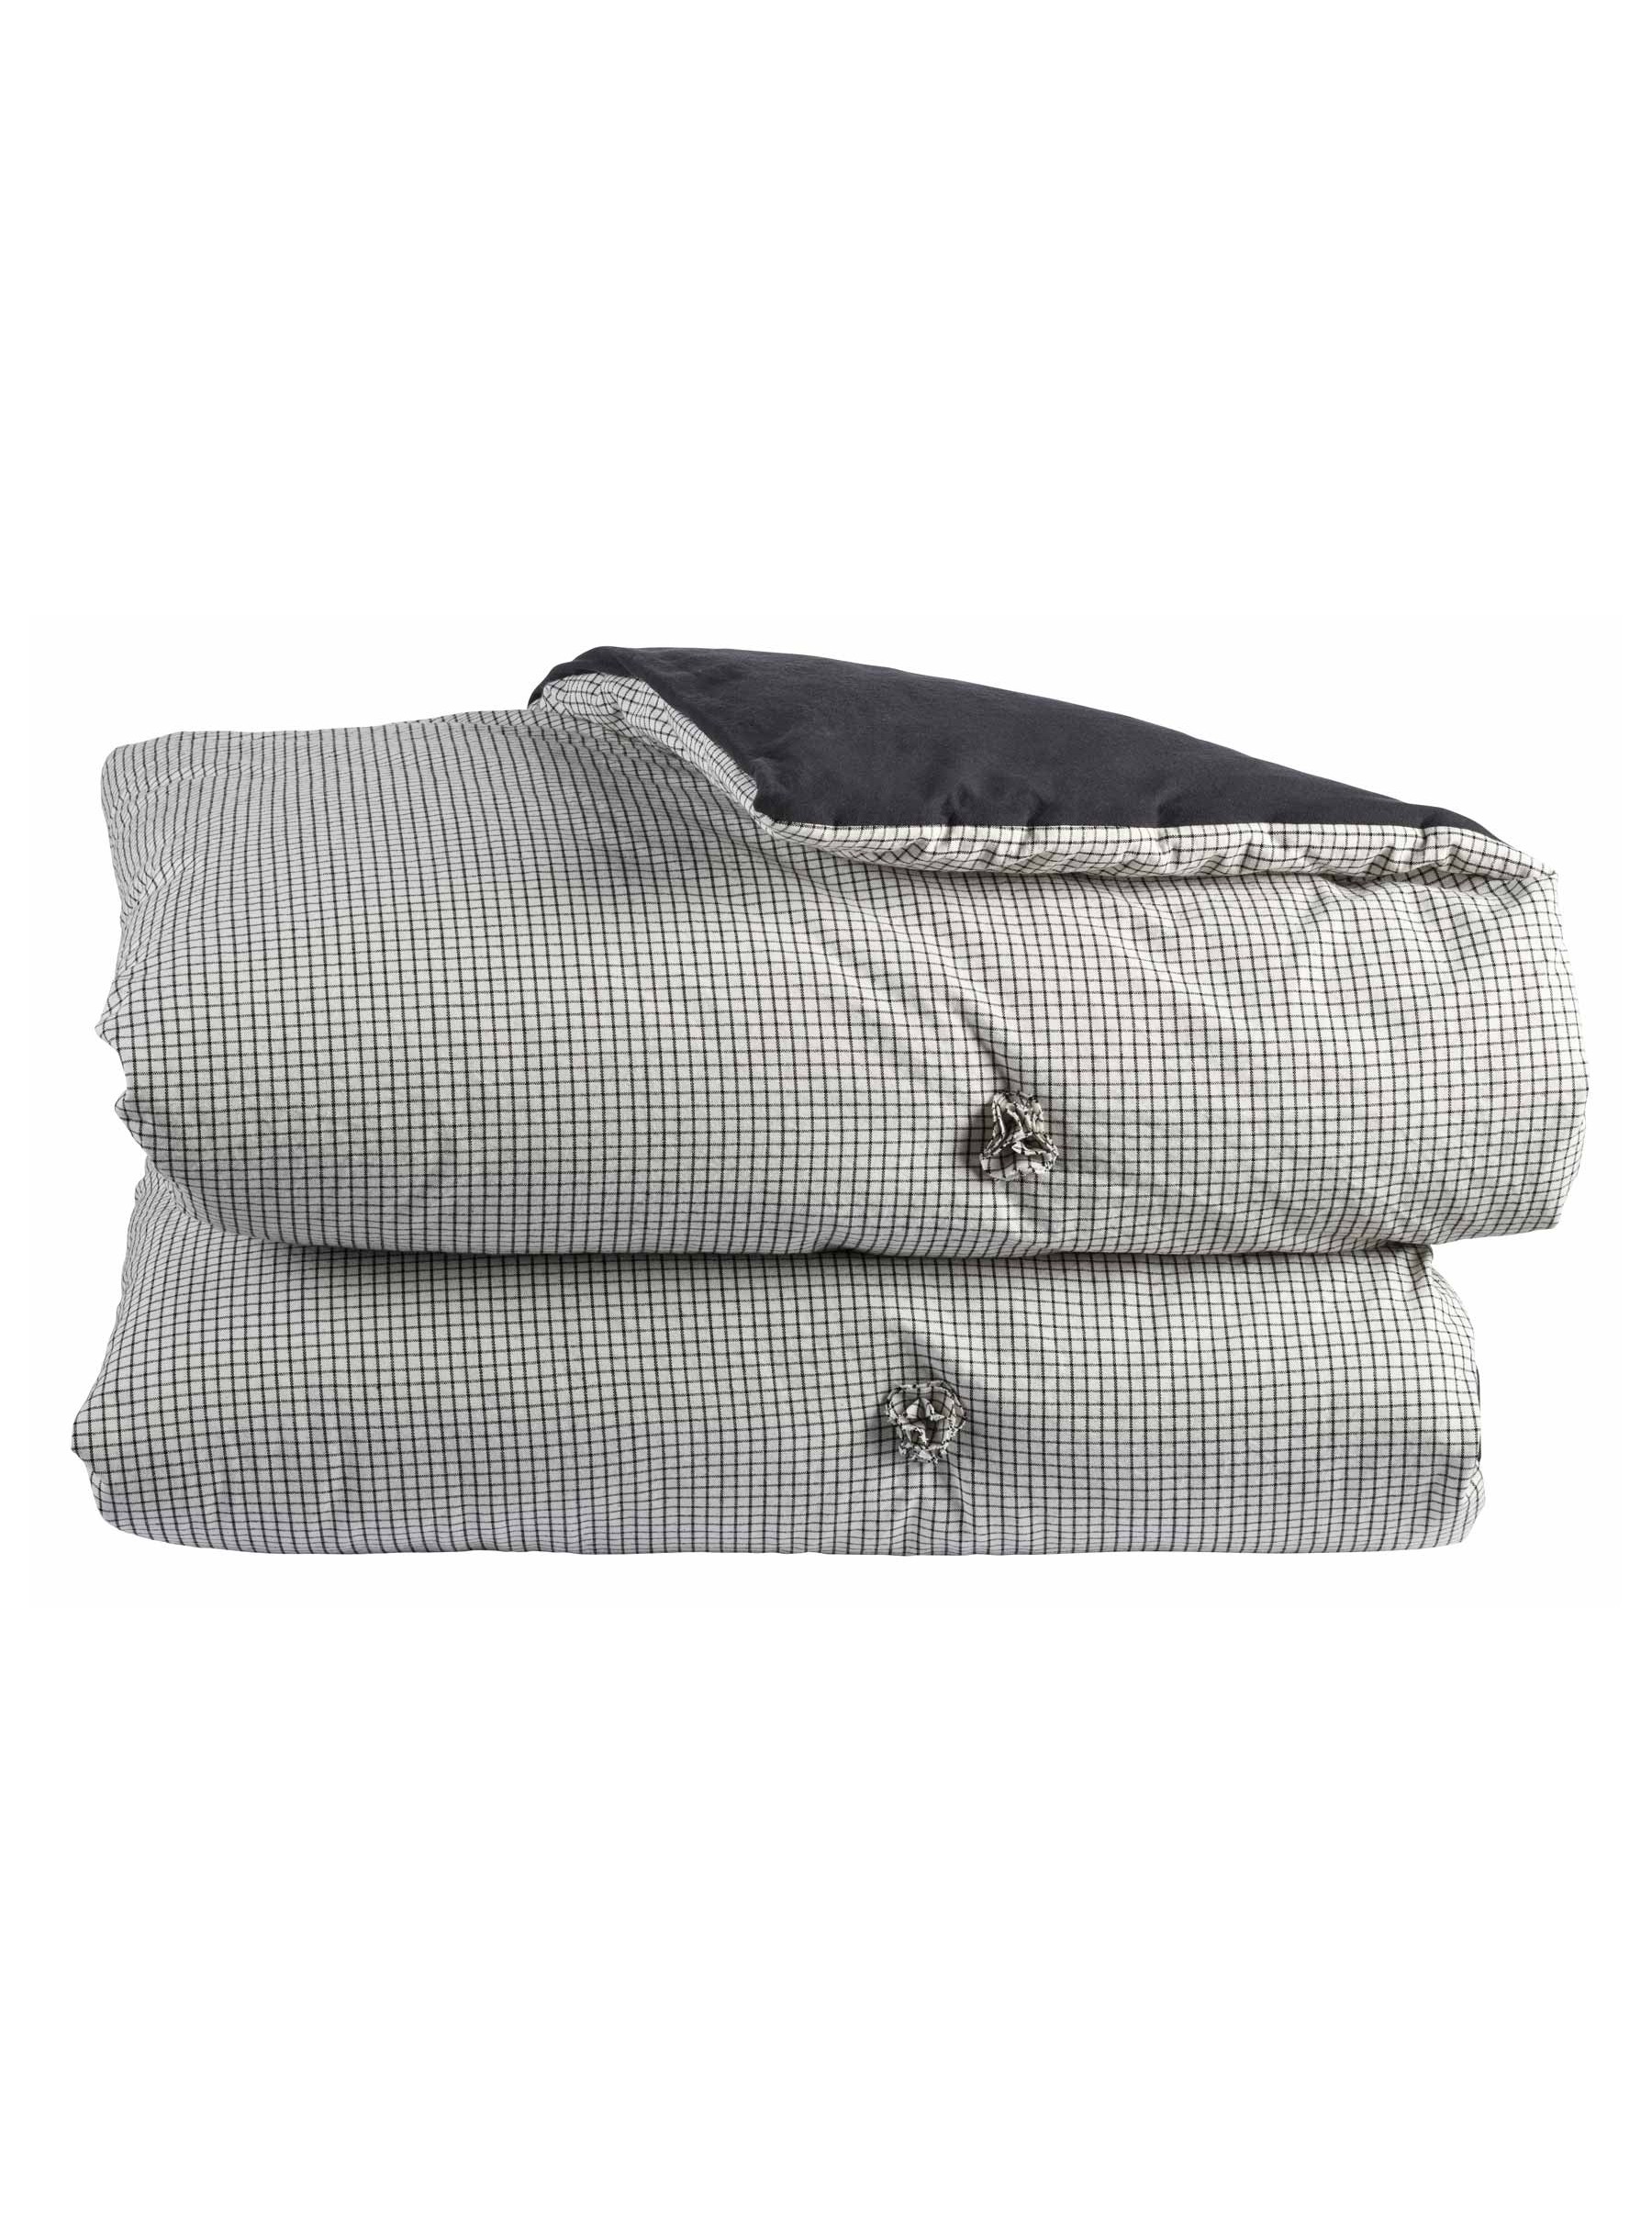 QUILTED BLANKET GUSTAVE CAVIAR 130